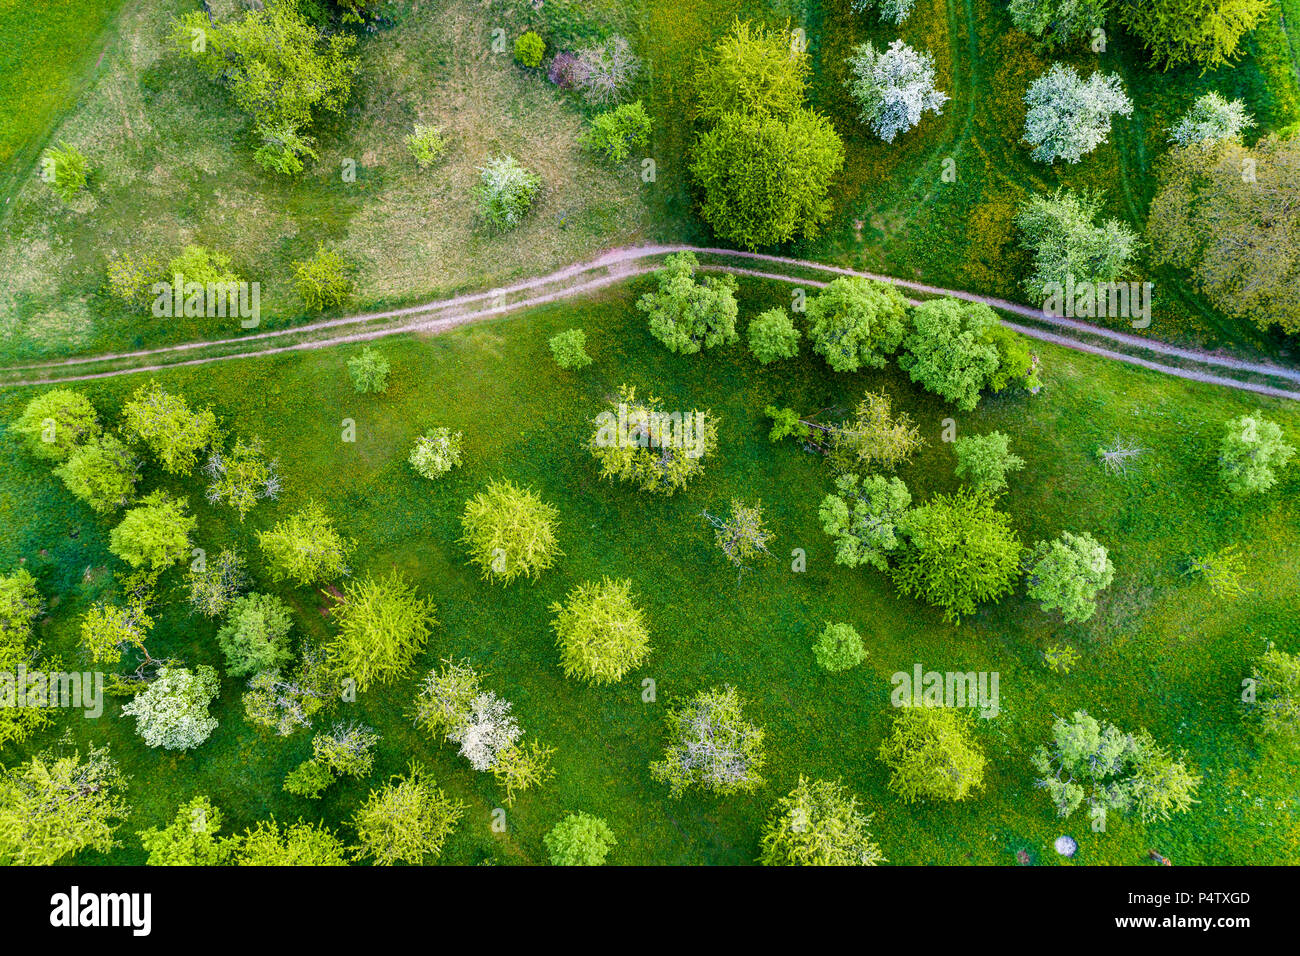 Germany, Baden-Wuerttemberg, Swabian Franconian forest, Rems-Murr-Kreis, Aerial view of meadow with scattered fruit trees and dirt road Stock Photo